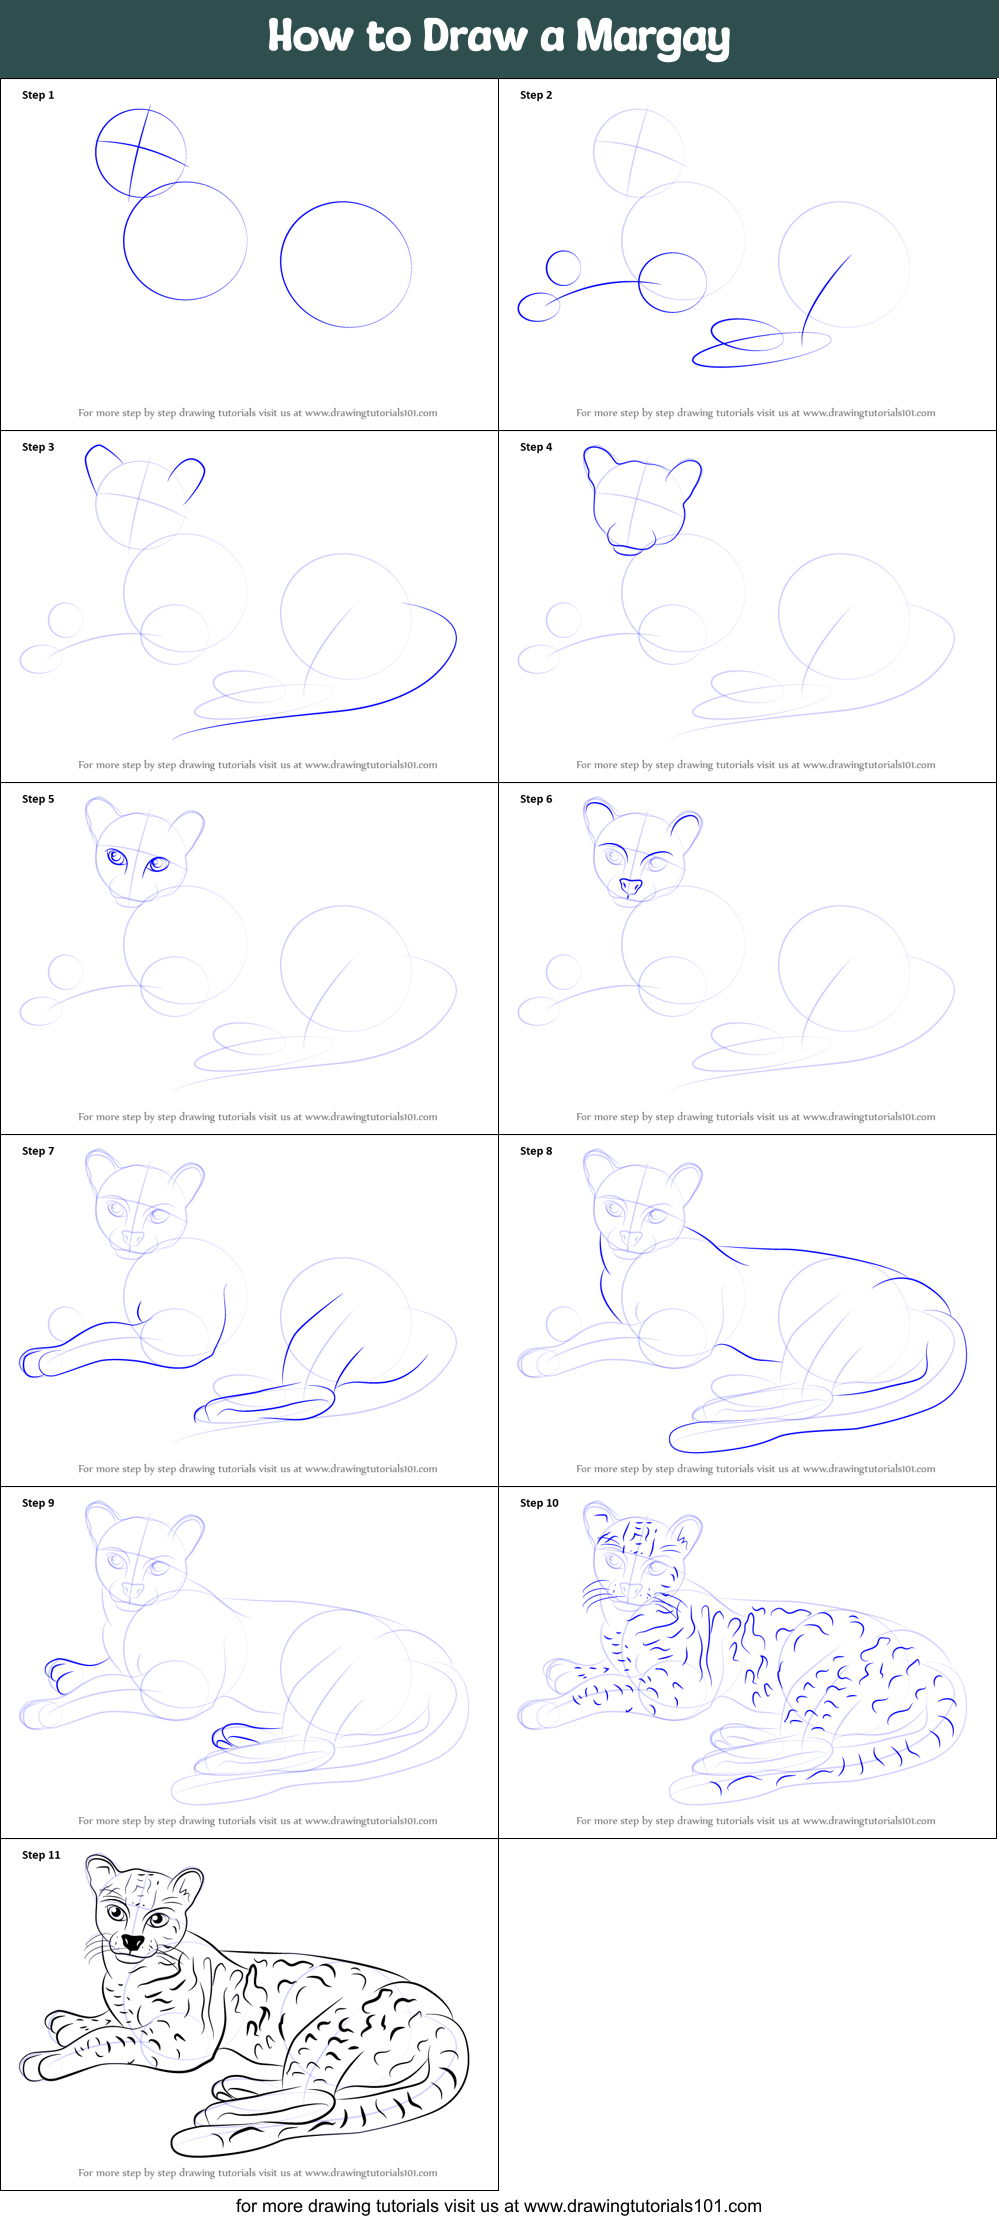 Download How to Draw a Margay printable step by step drawing sheet : DrawingTutorials101.com